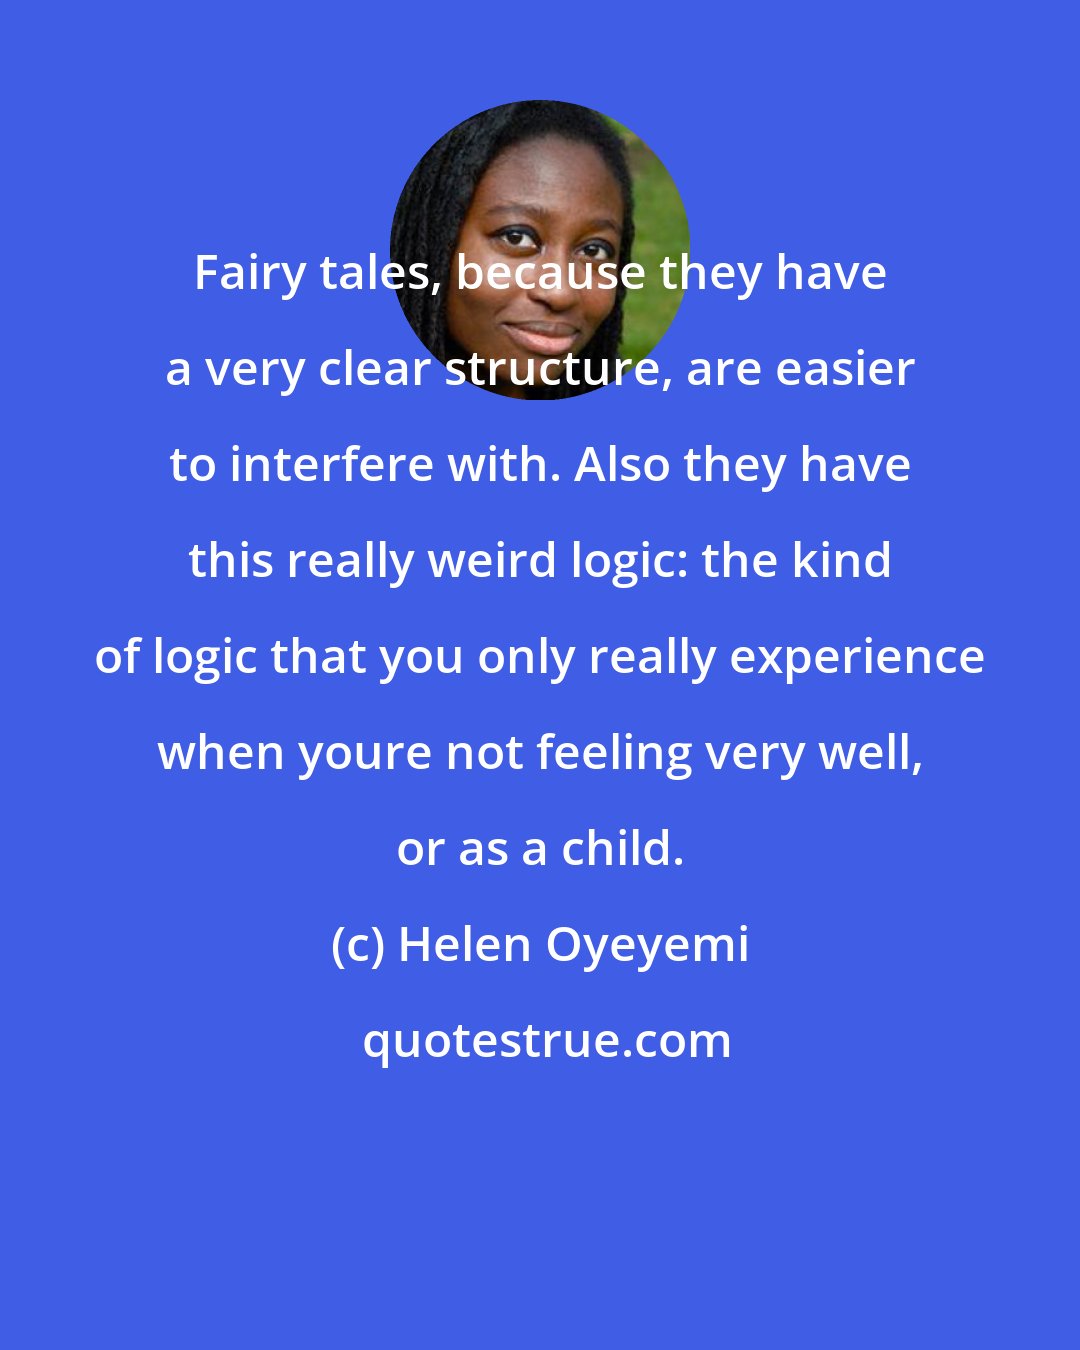 Helen Oyeyemi: Fairy tales, because they have a very clear structure, are easier to interfere with. Also they have this really weird logic: the kind of logic that you only really experience when youre not feeling very well, or as a child.